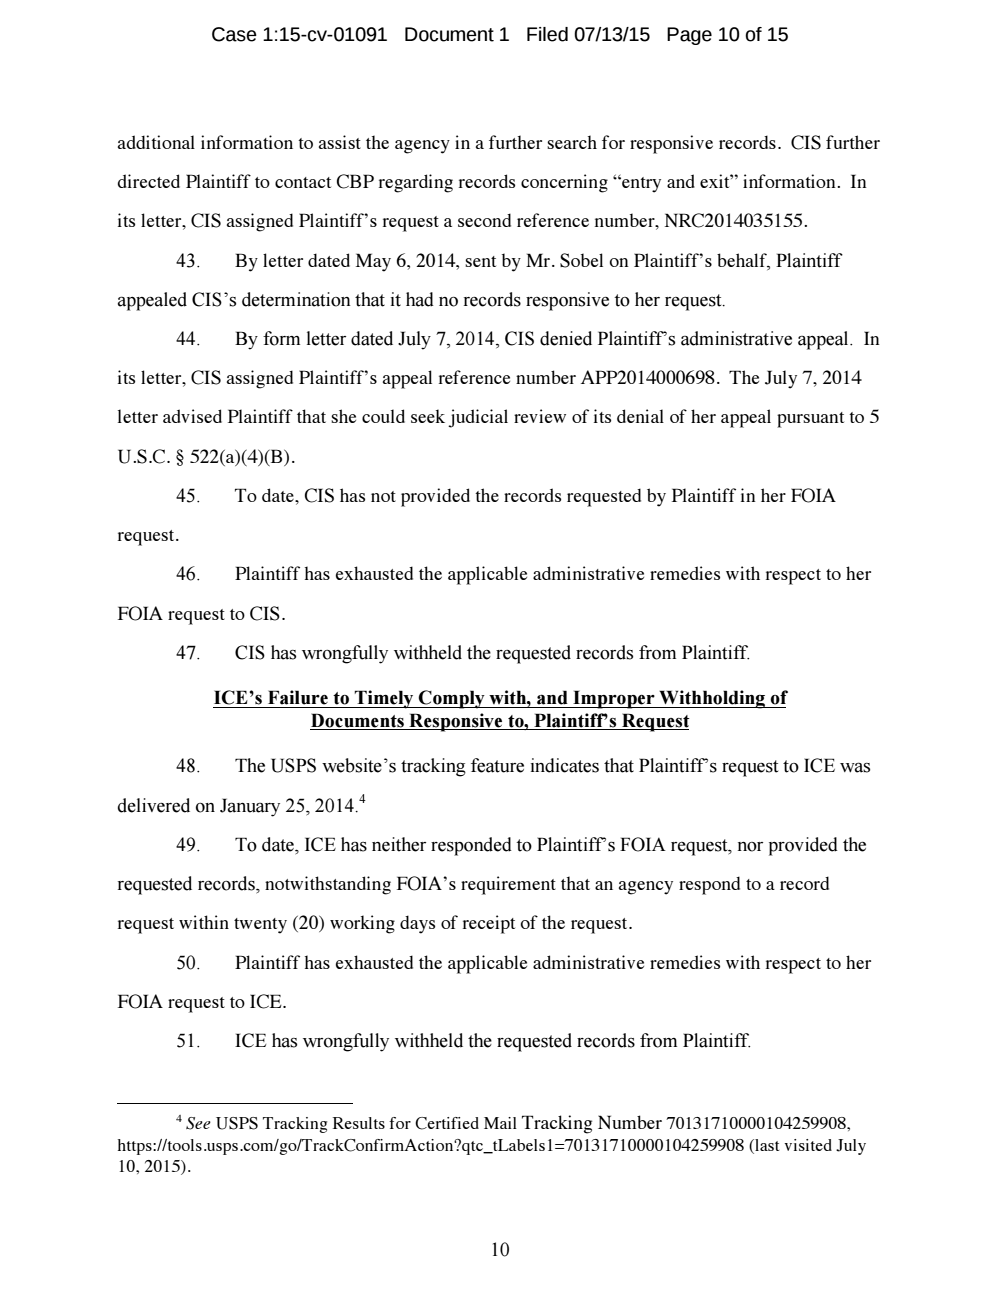 Page 10 from Laura Poitras FOIA Lawsuit